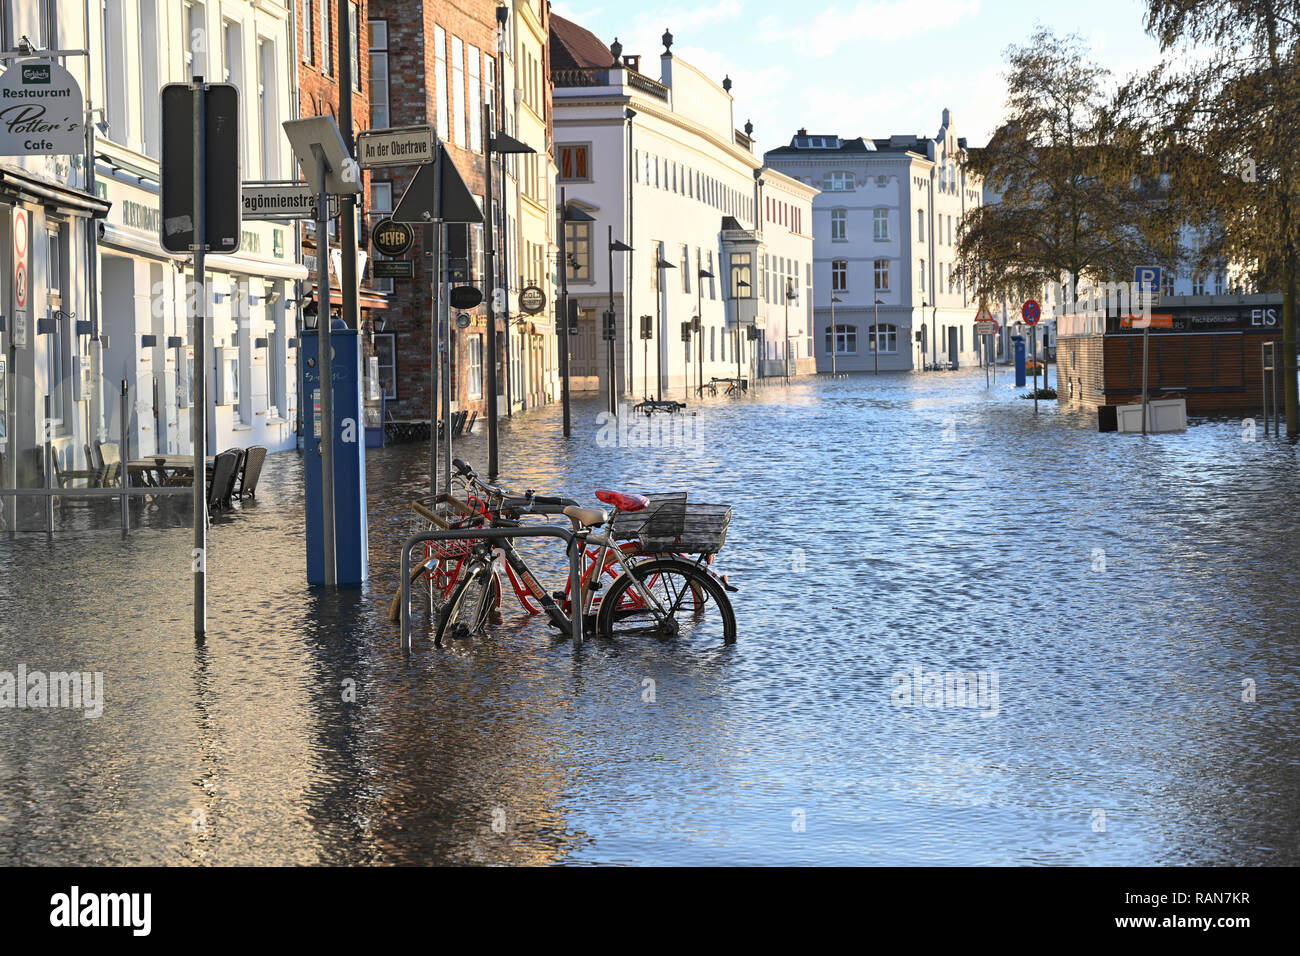 LUEBECK, GERMANY, JANUARY 2, 2019:  bicycles in the flood of the river Trave with high water in the historic old town of Luebeck, Germany, blue sky, c Stock Photo